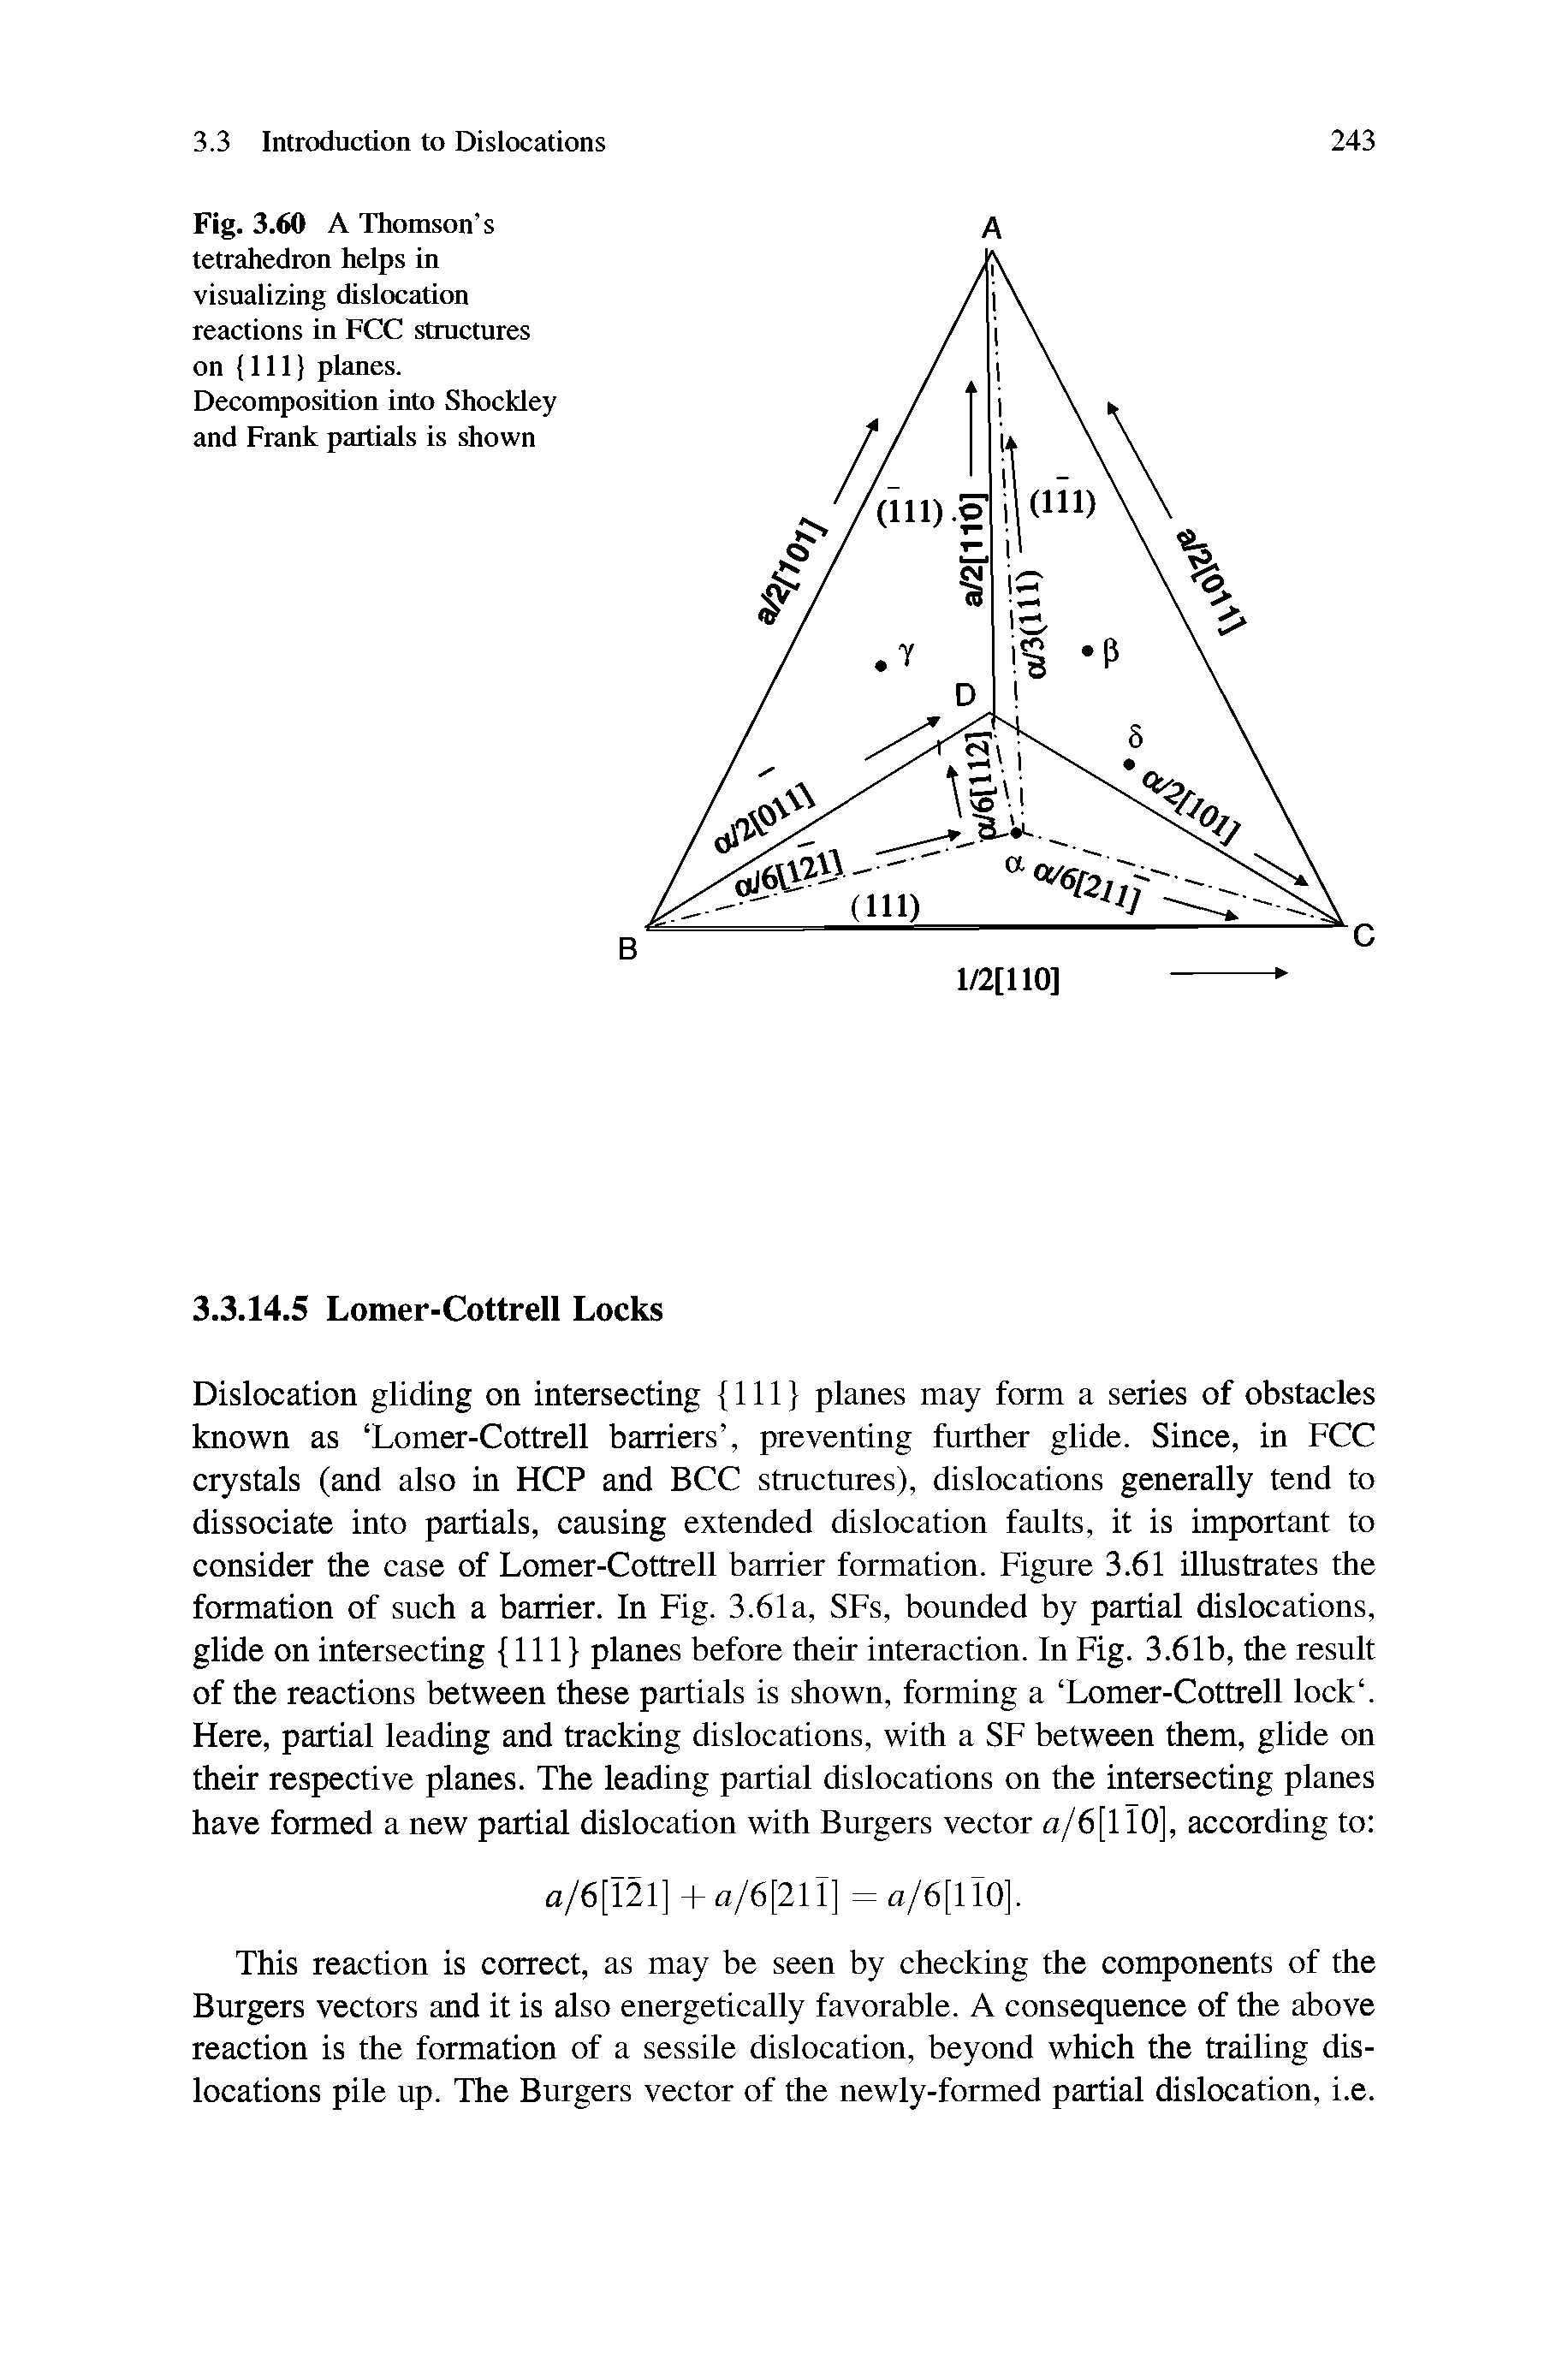 Fig. 3.60 A Thomson s tetrahedron helps in visualizing dislocation reactions in FCC structures on 111) planes. Decomposition into Shockley and Frank paitials is shown...